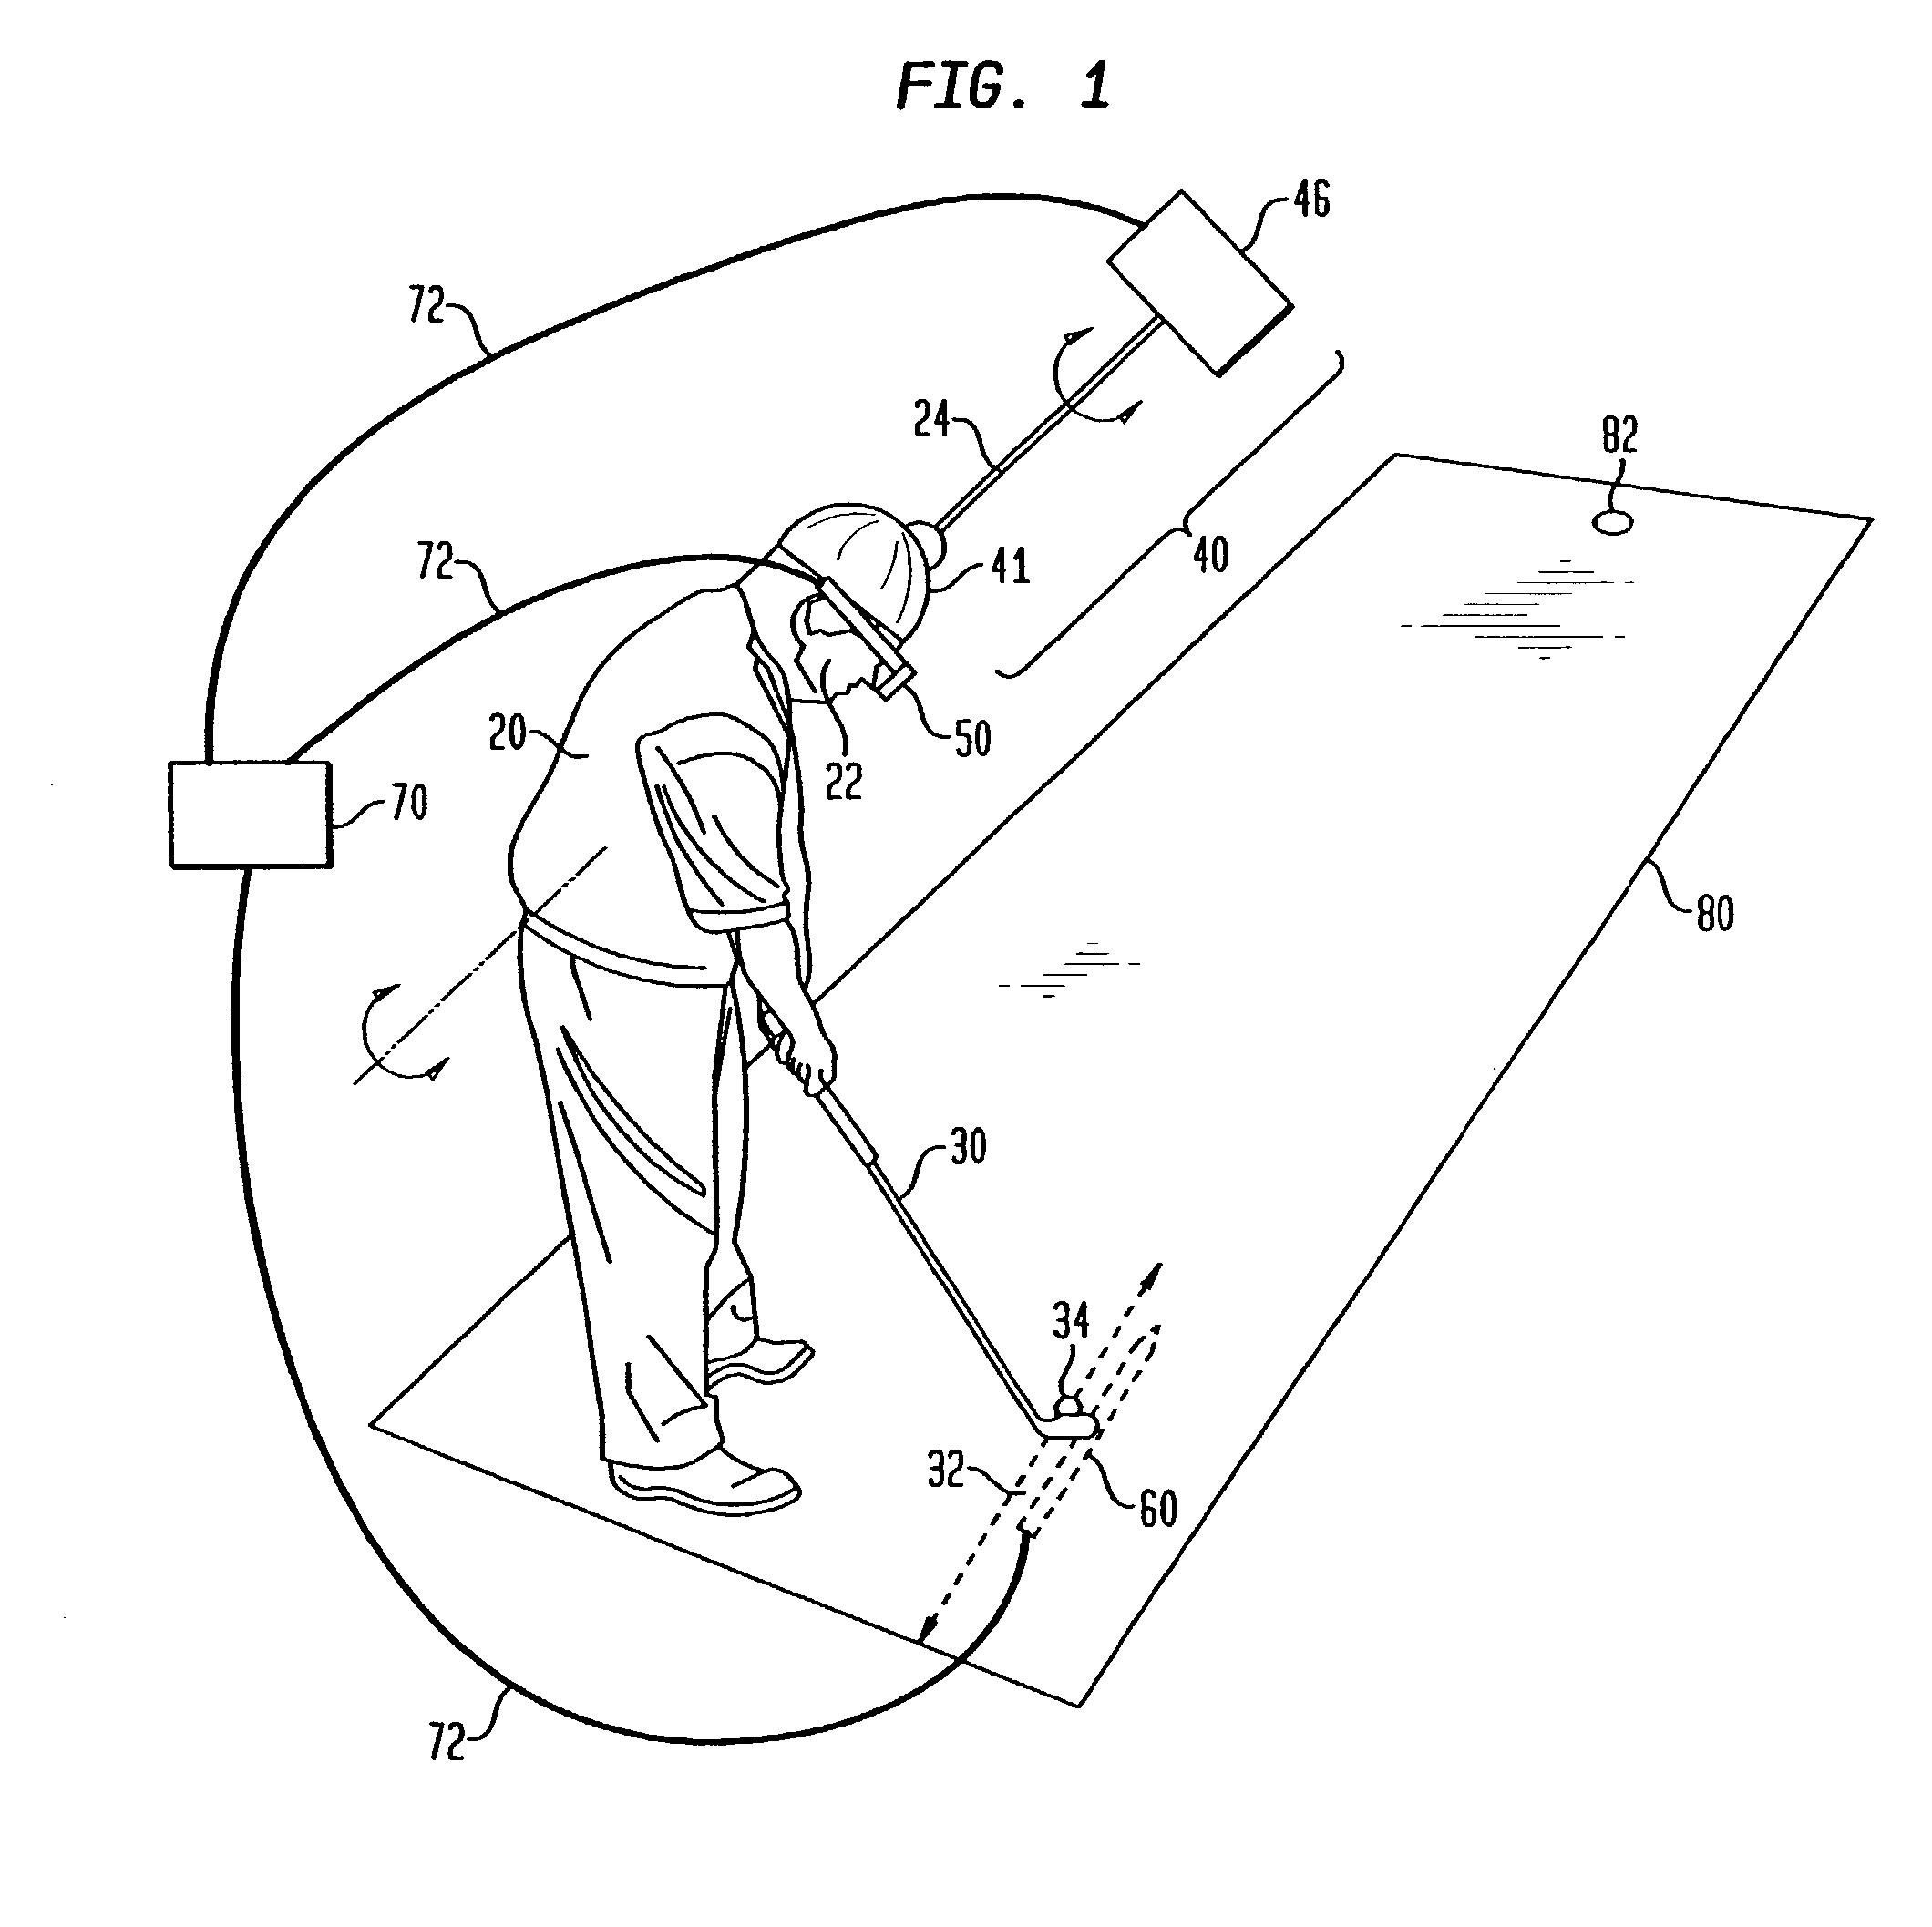 Method and apparatus for analyzing a golf stroke